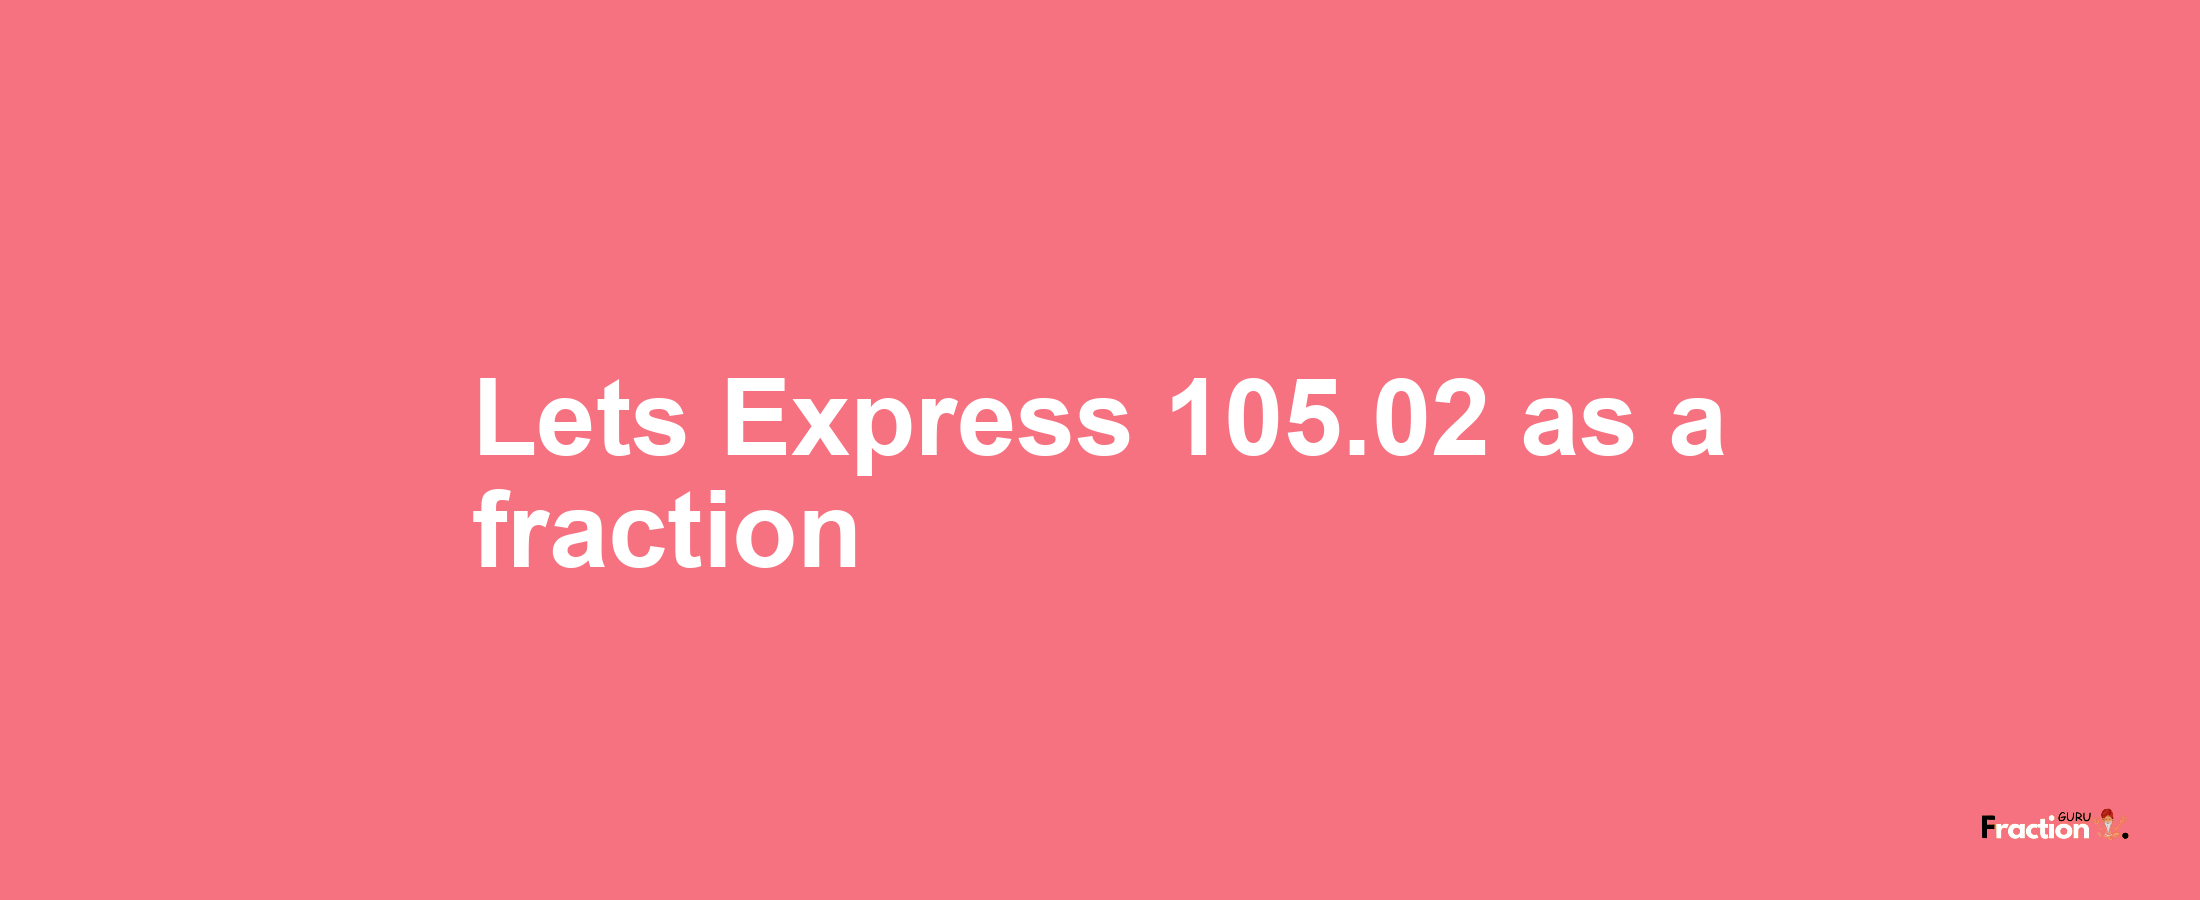 Lets Express 105.02 as afraction